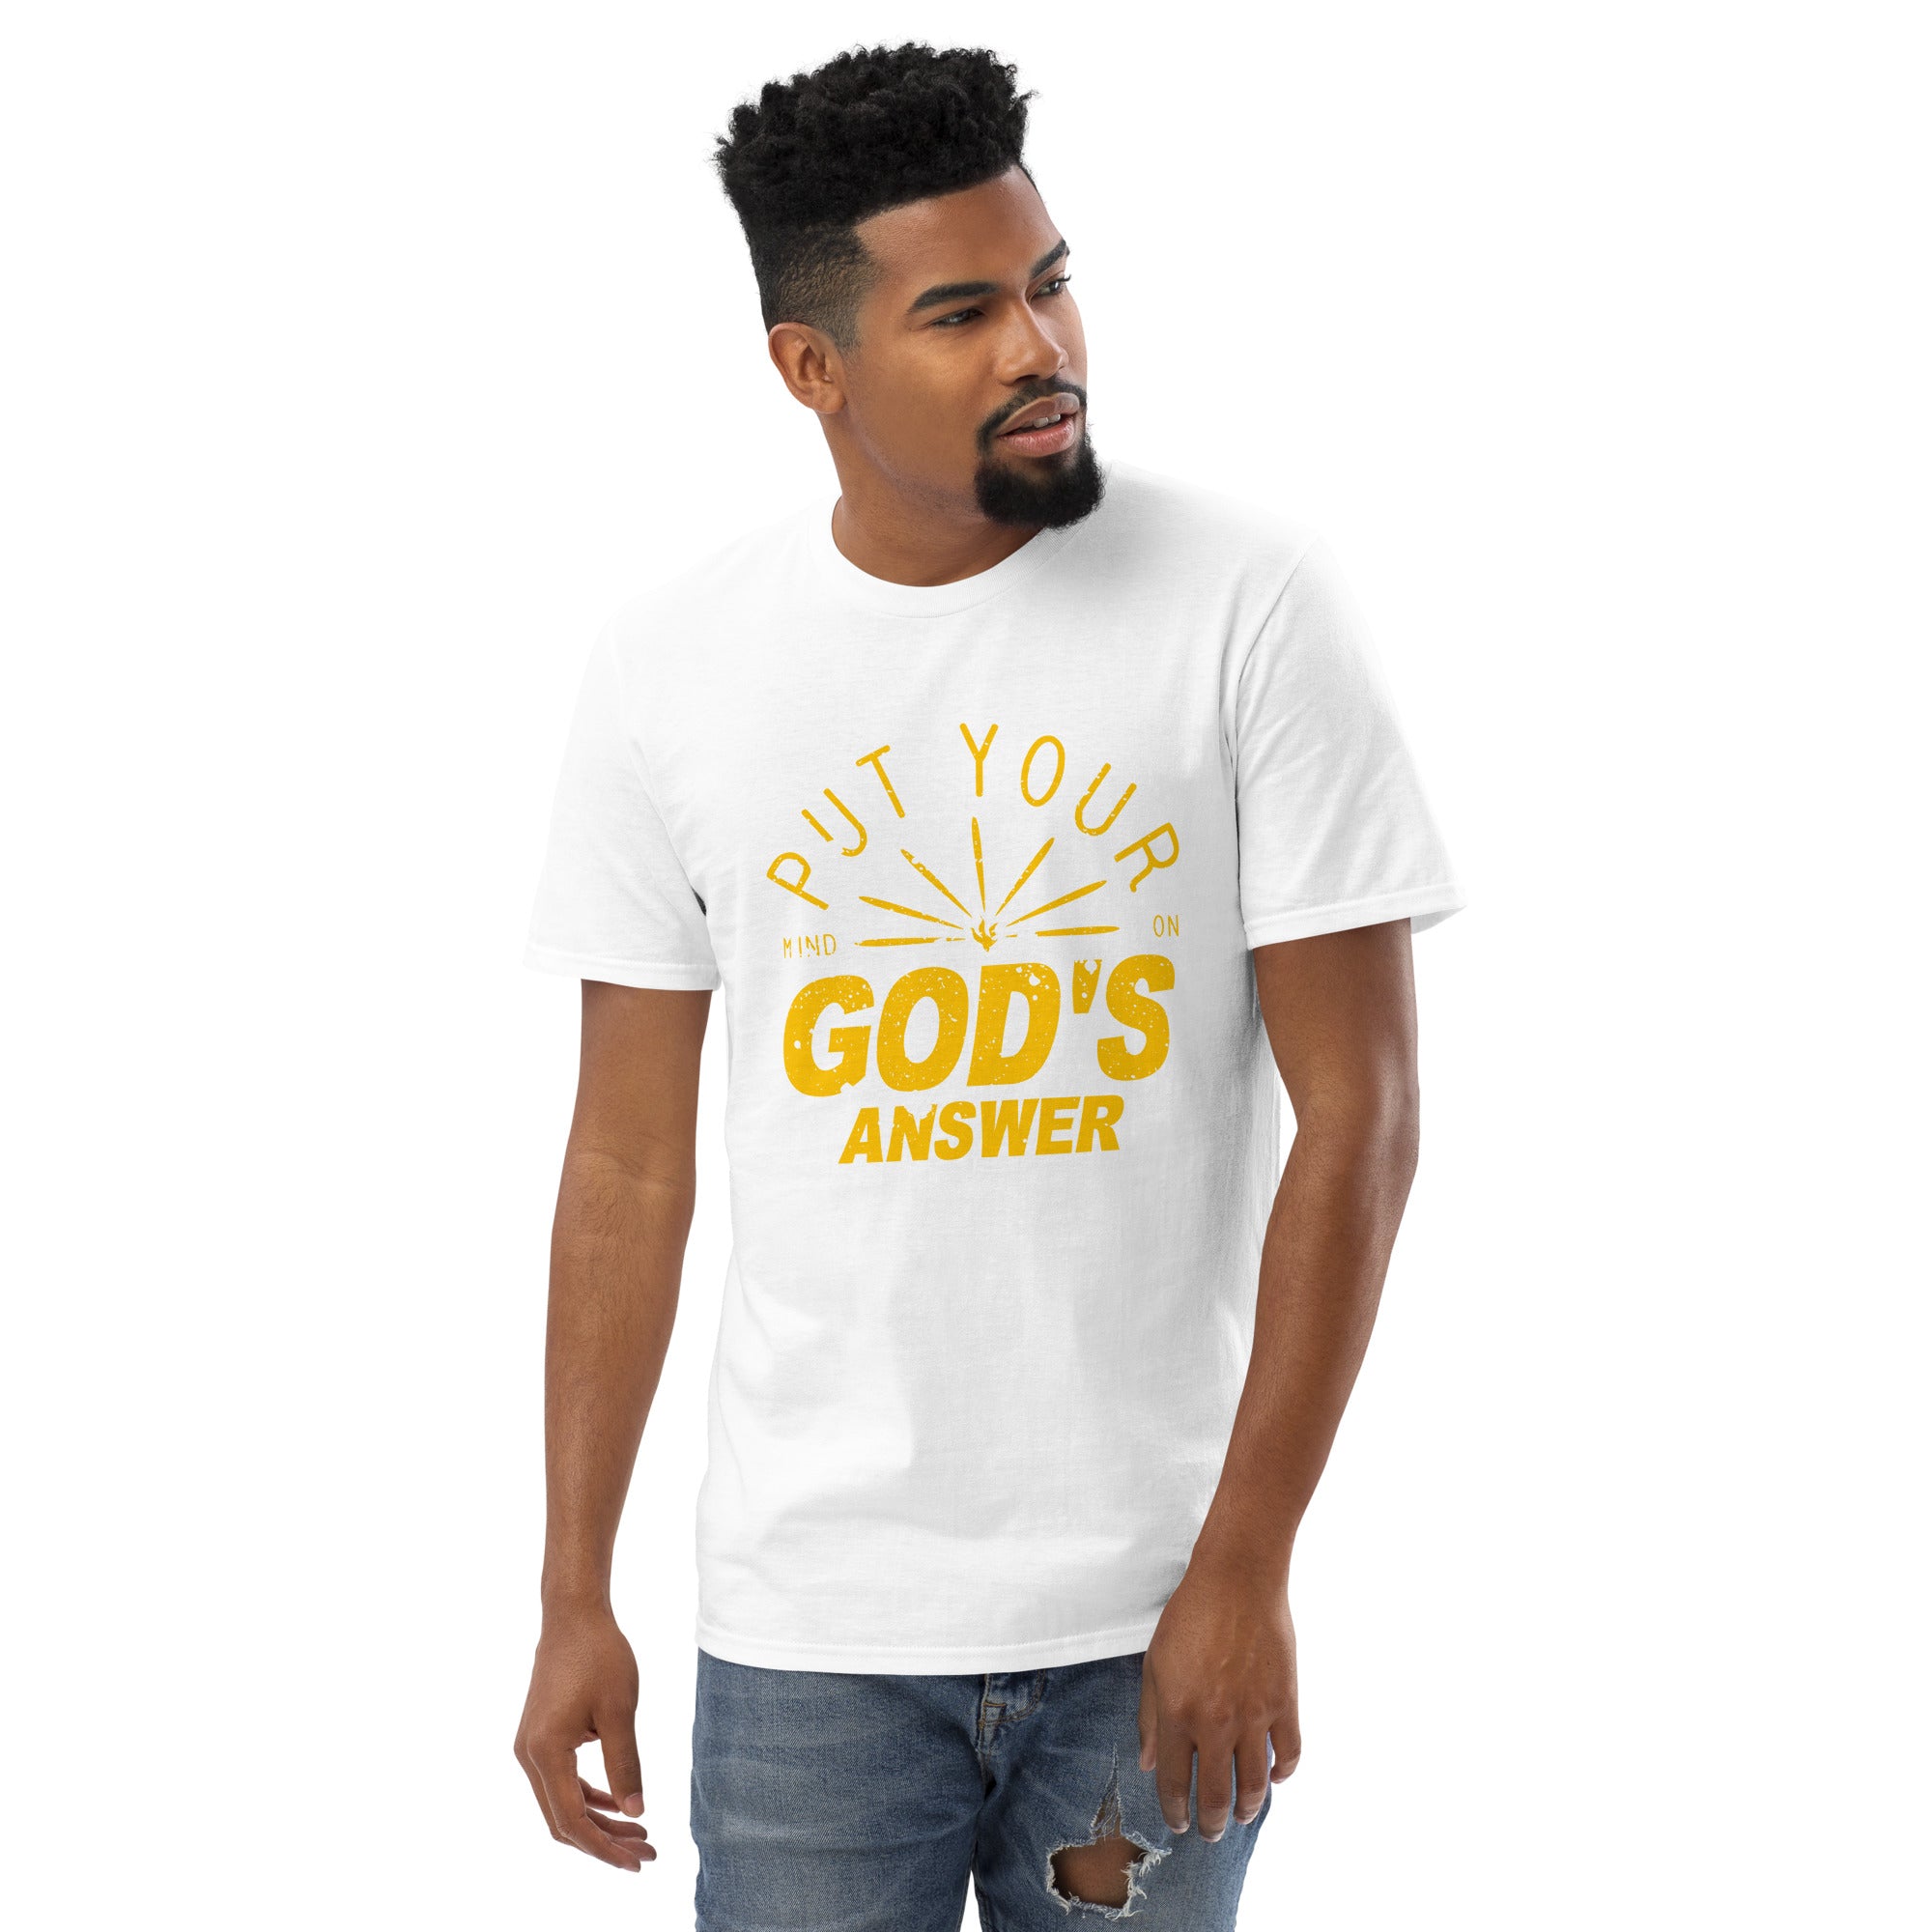 Put your mind on God's answer Tee